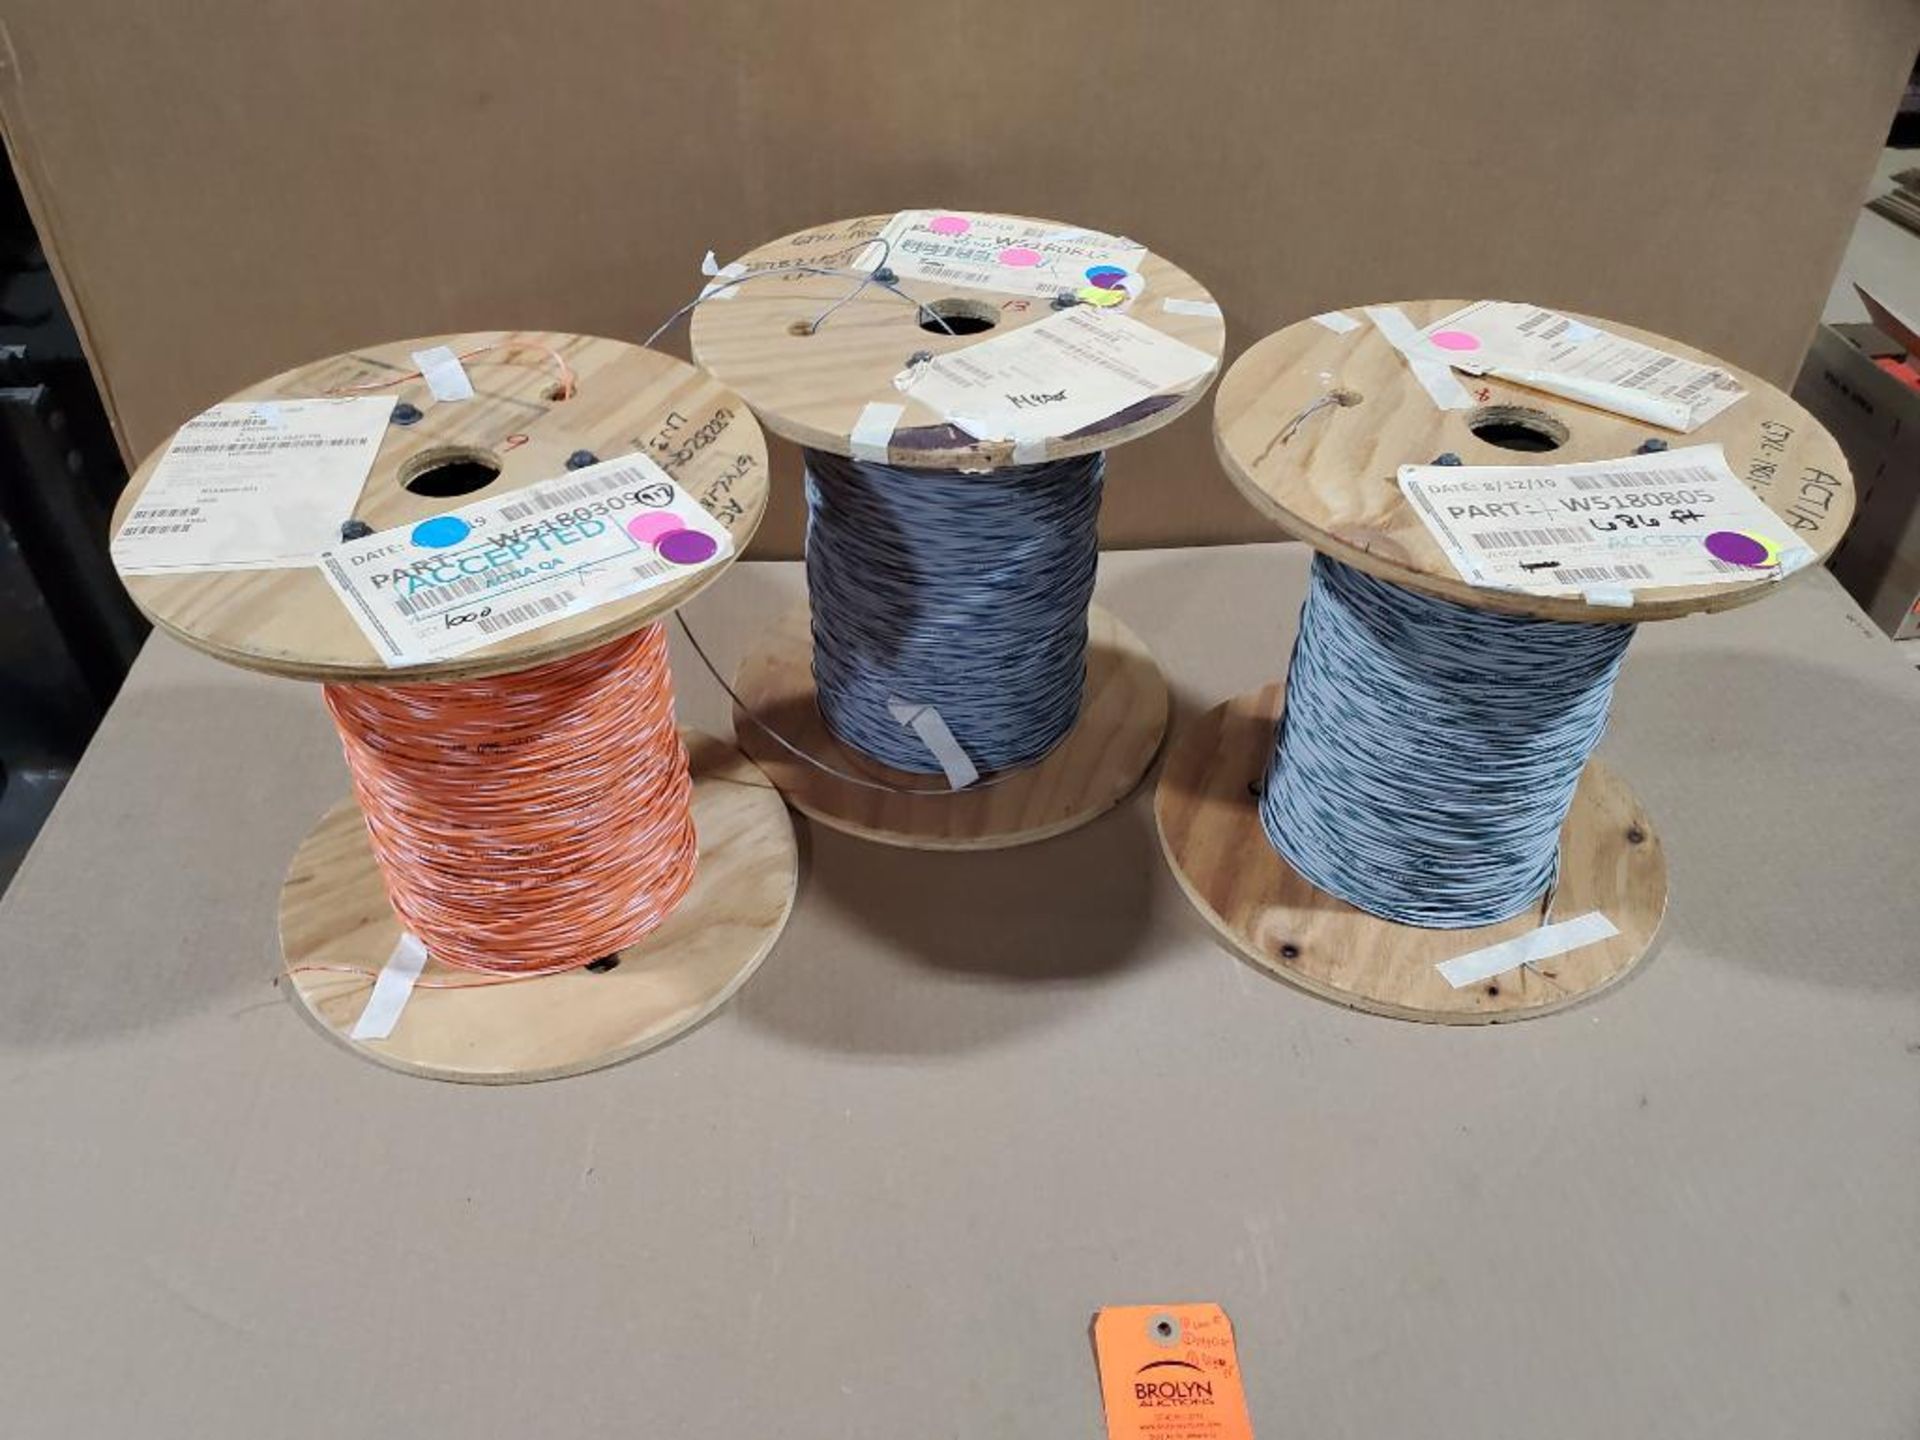 Qty 3 - 18 awg assorted copper wire. 30lbs total gross combined weight for all rolls.